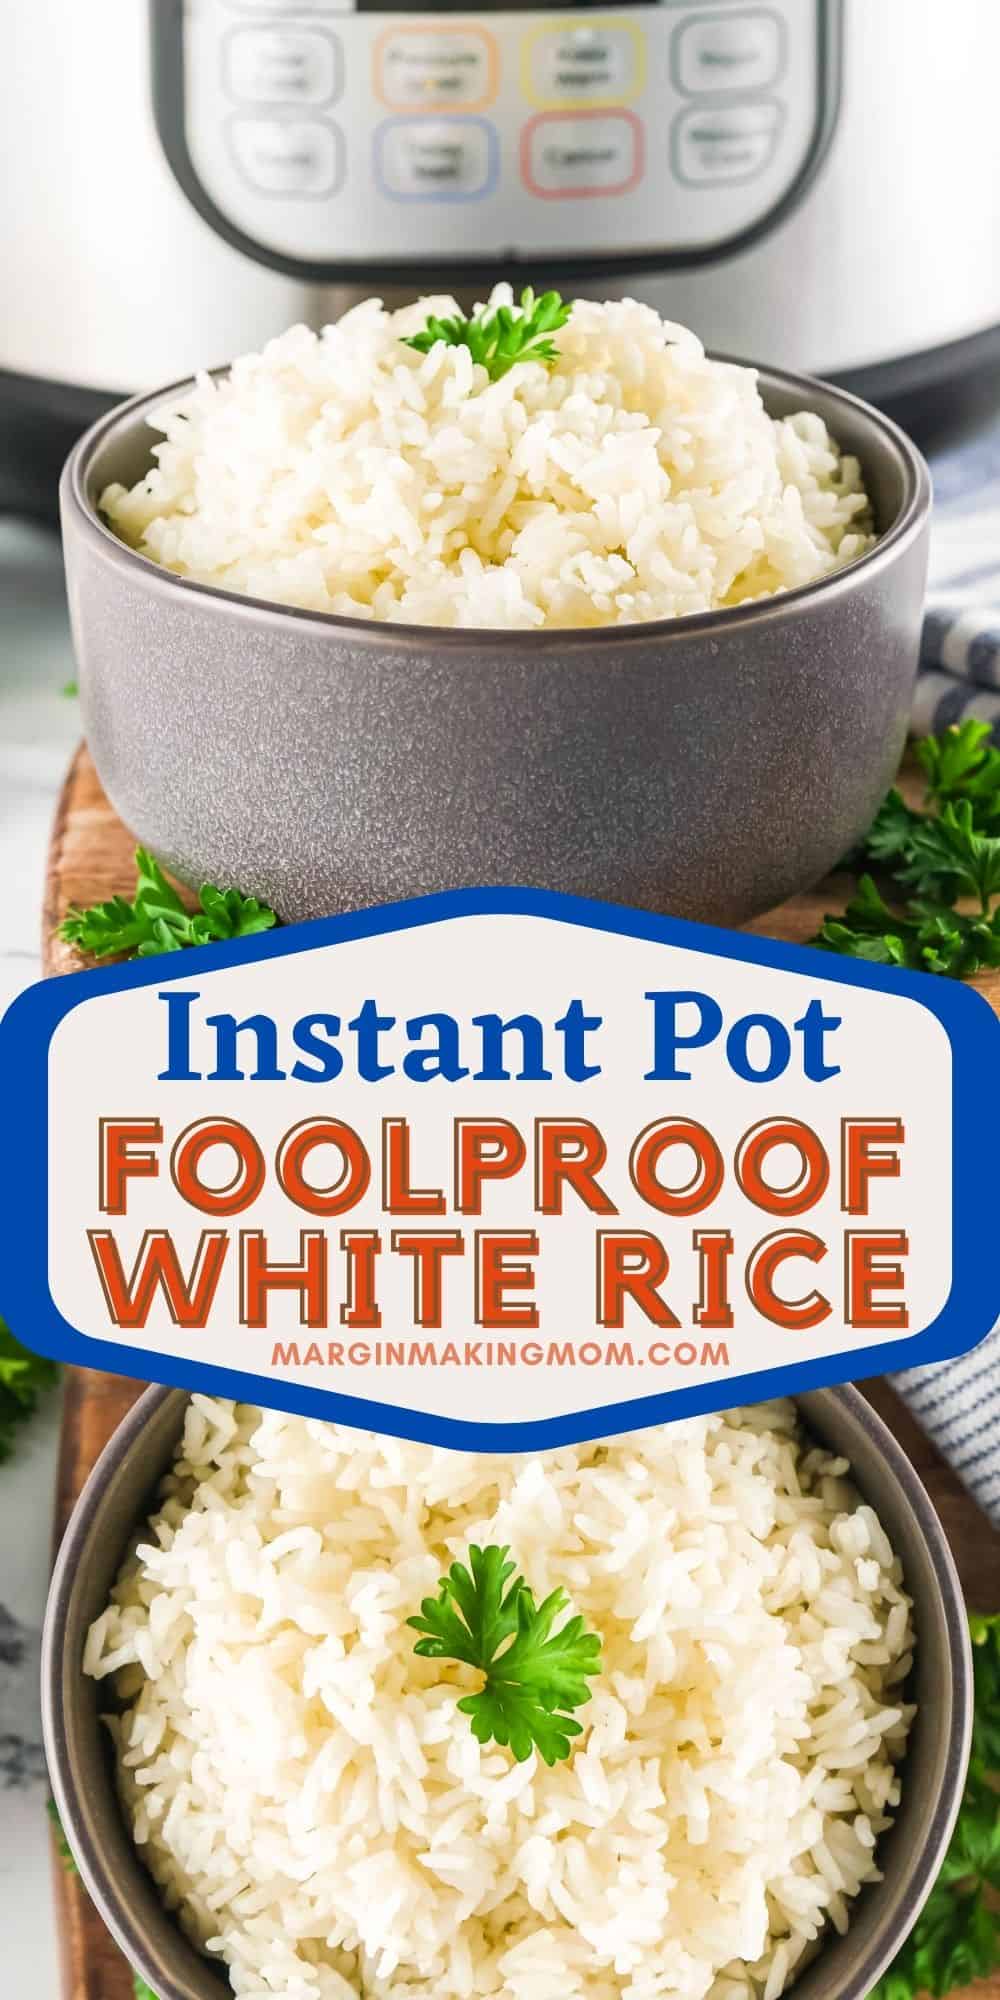 collage image featuring two photos of Instant Pot white rice. One is a side view and one is overhead view